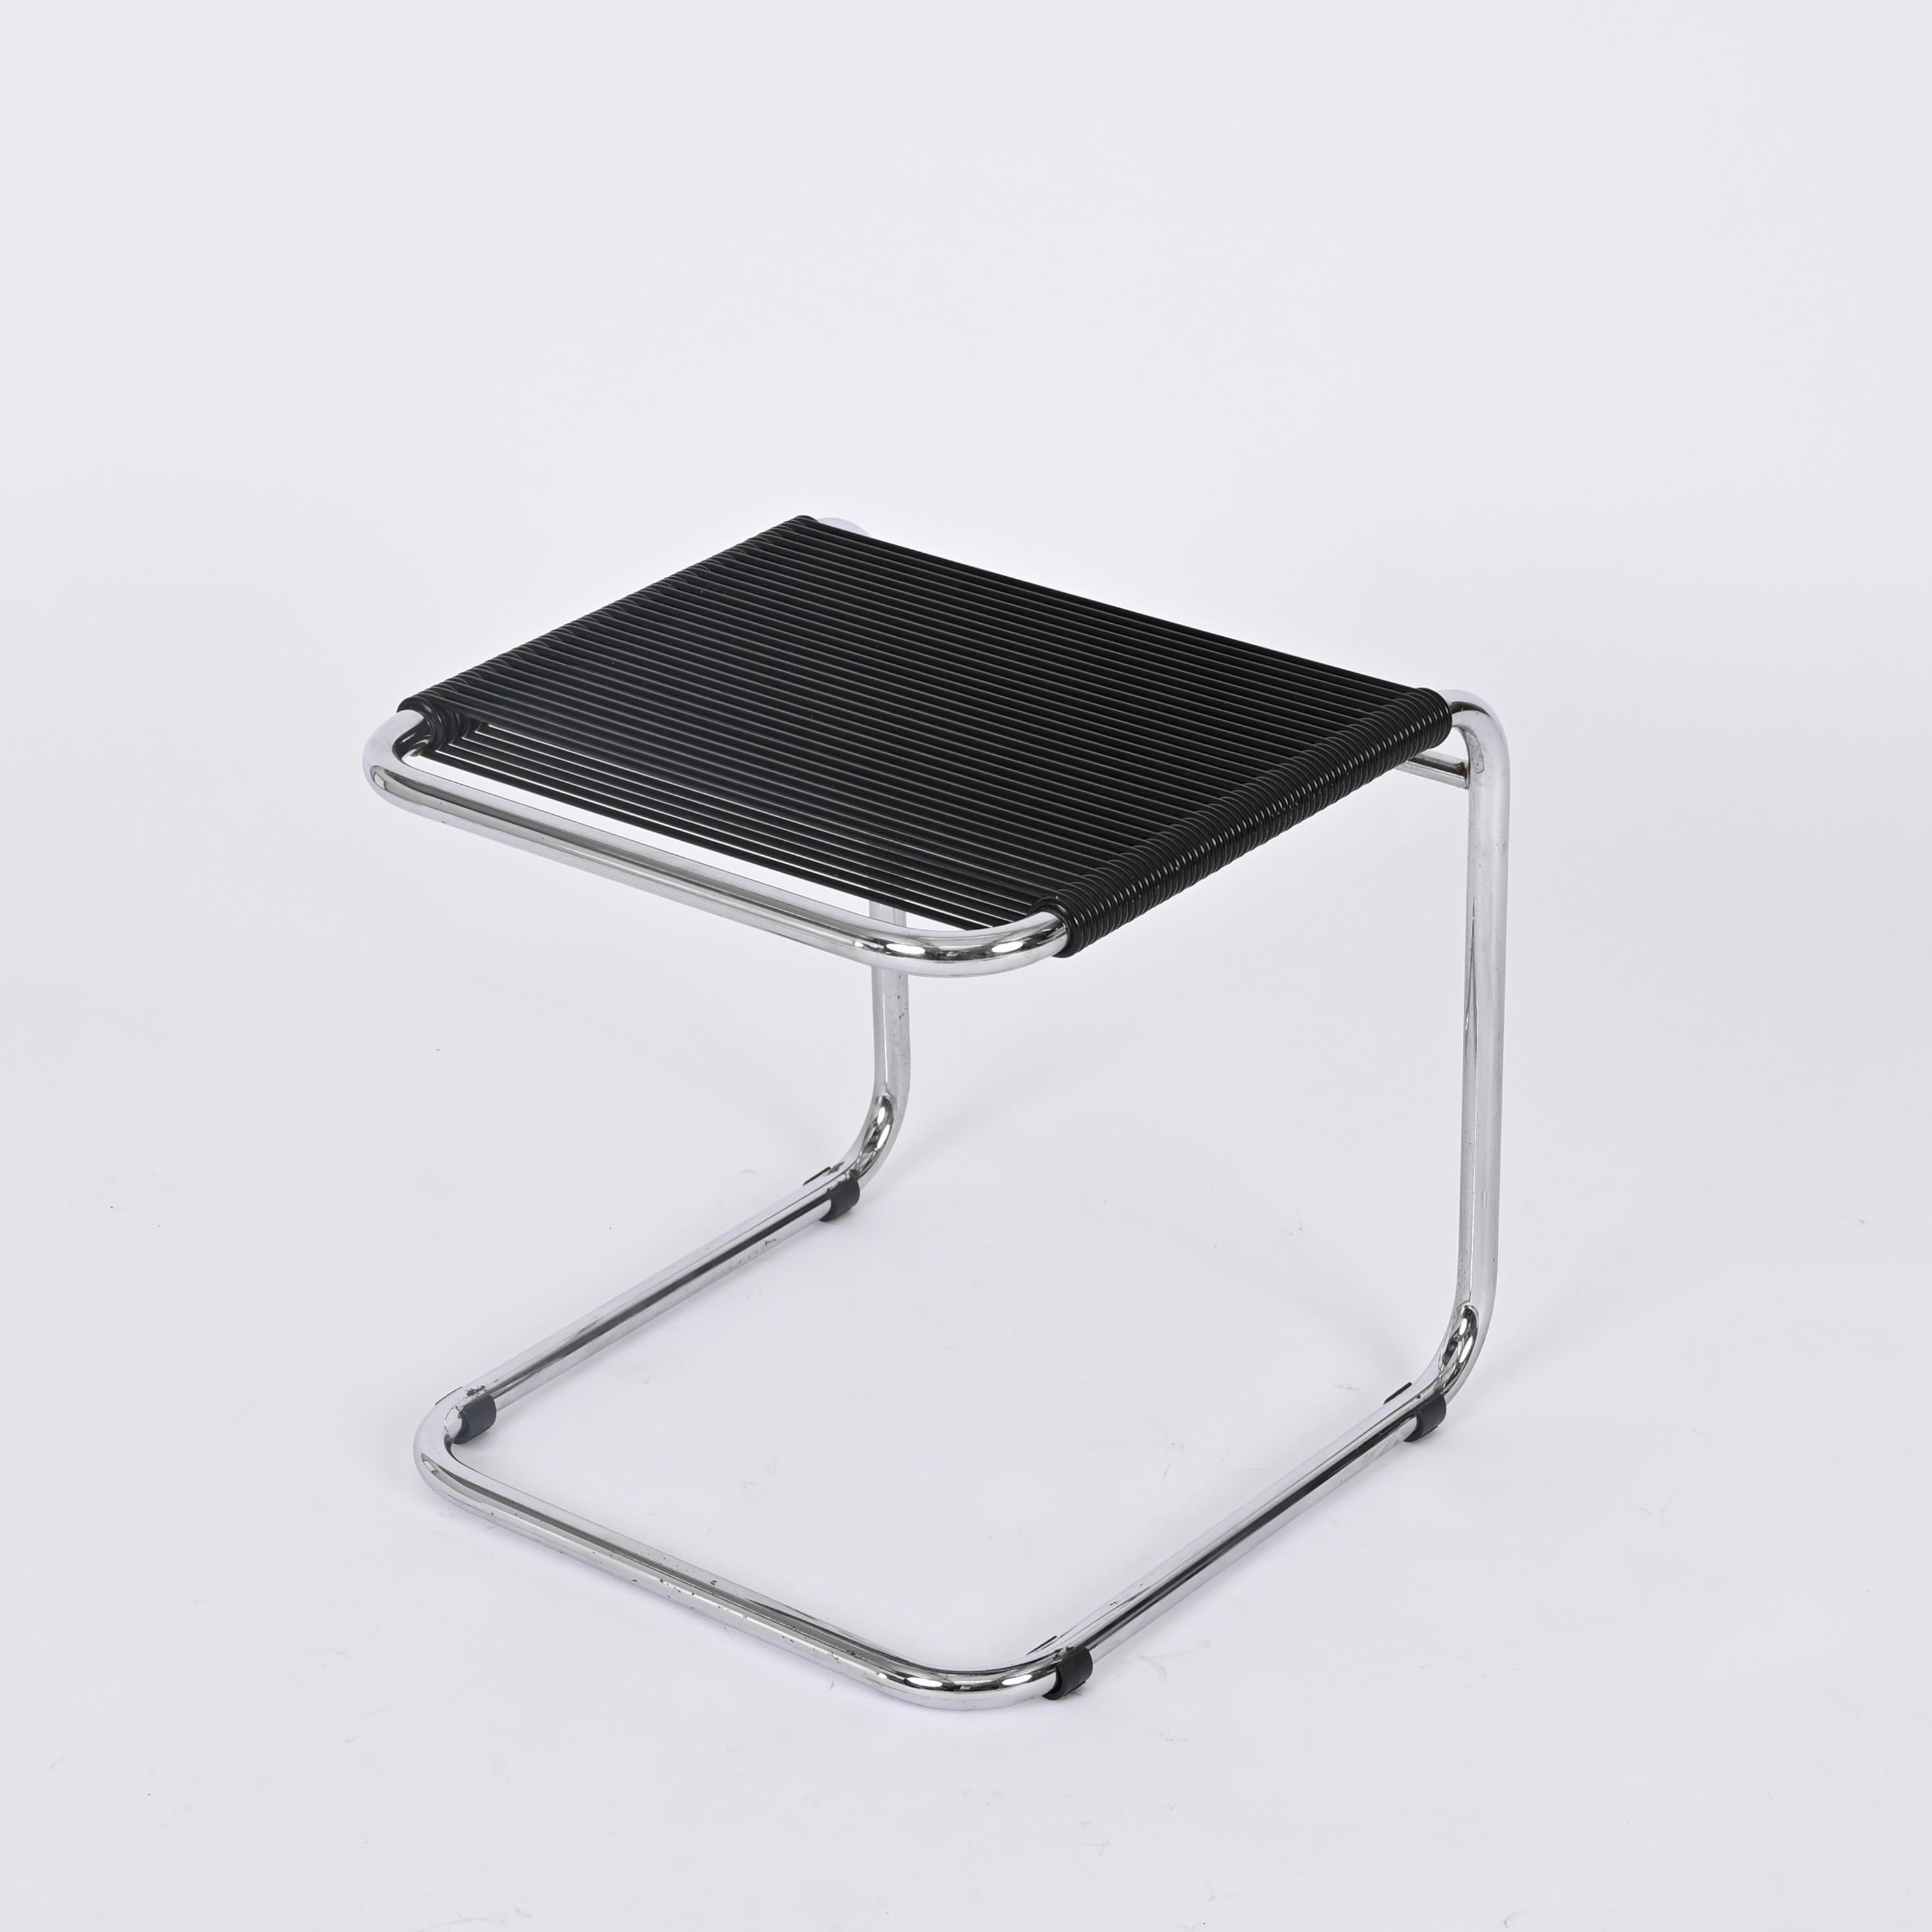 Andre Dupre Bauhaus Pouf Stool Chromed Steel and Black Rubber, Knoll 1950s For Sale 4